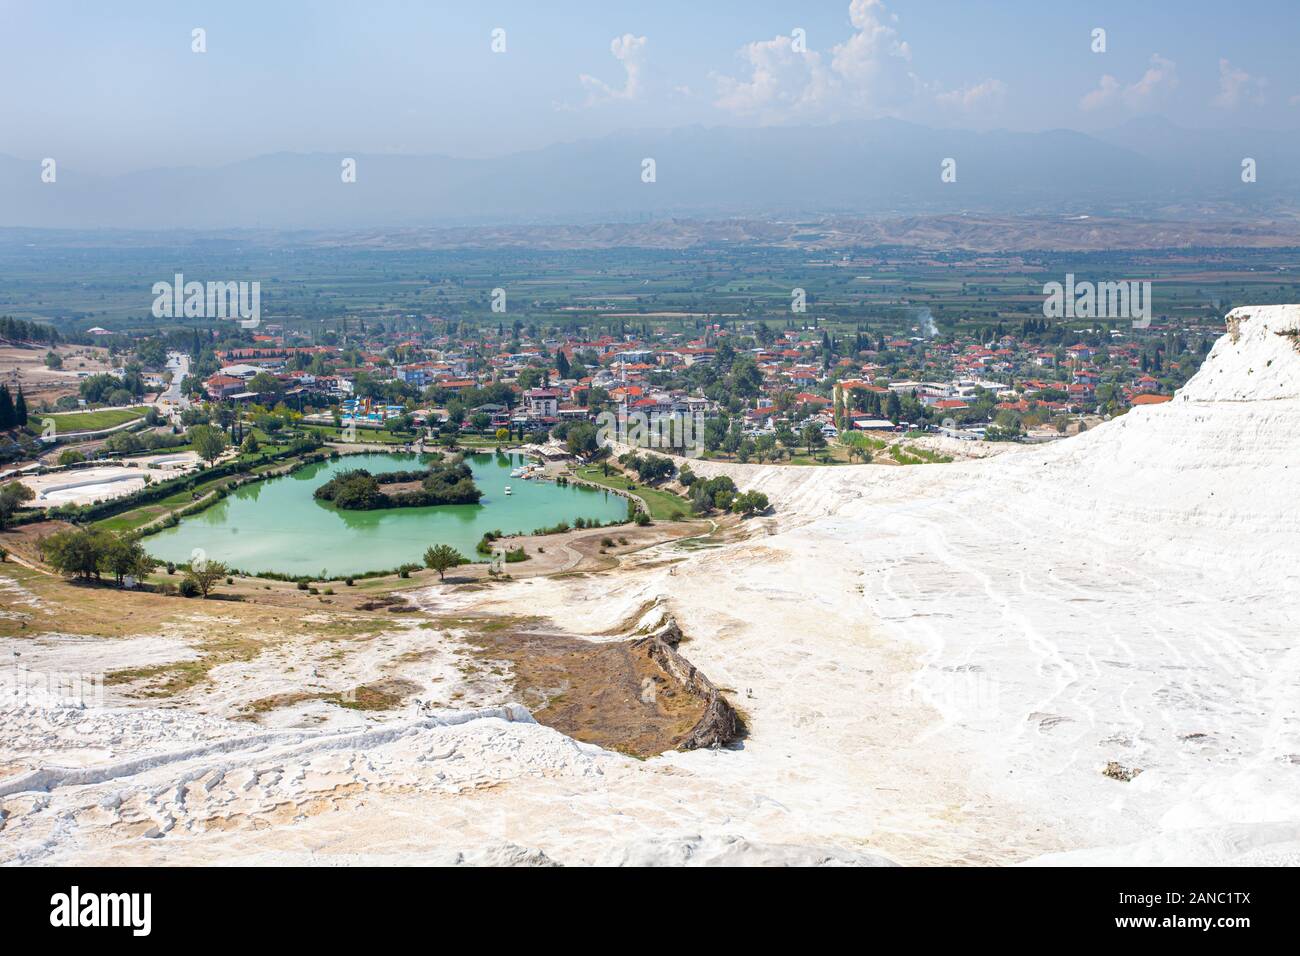 View of the unique Pamukkale natural complex with white cliffs, an emerald lake, a picturesque village and a beautiful valley. Stock Photo